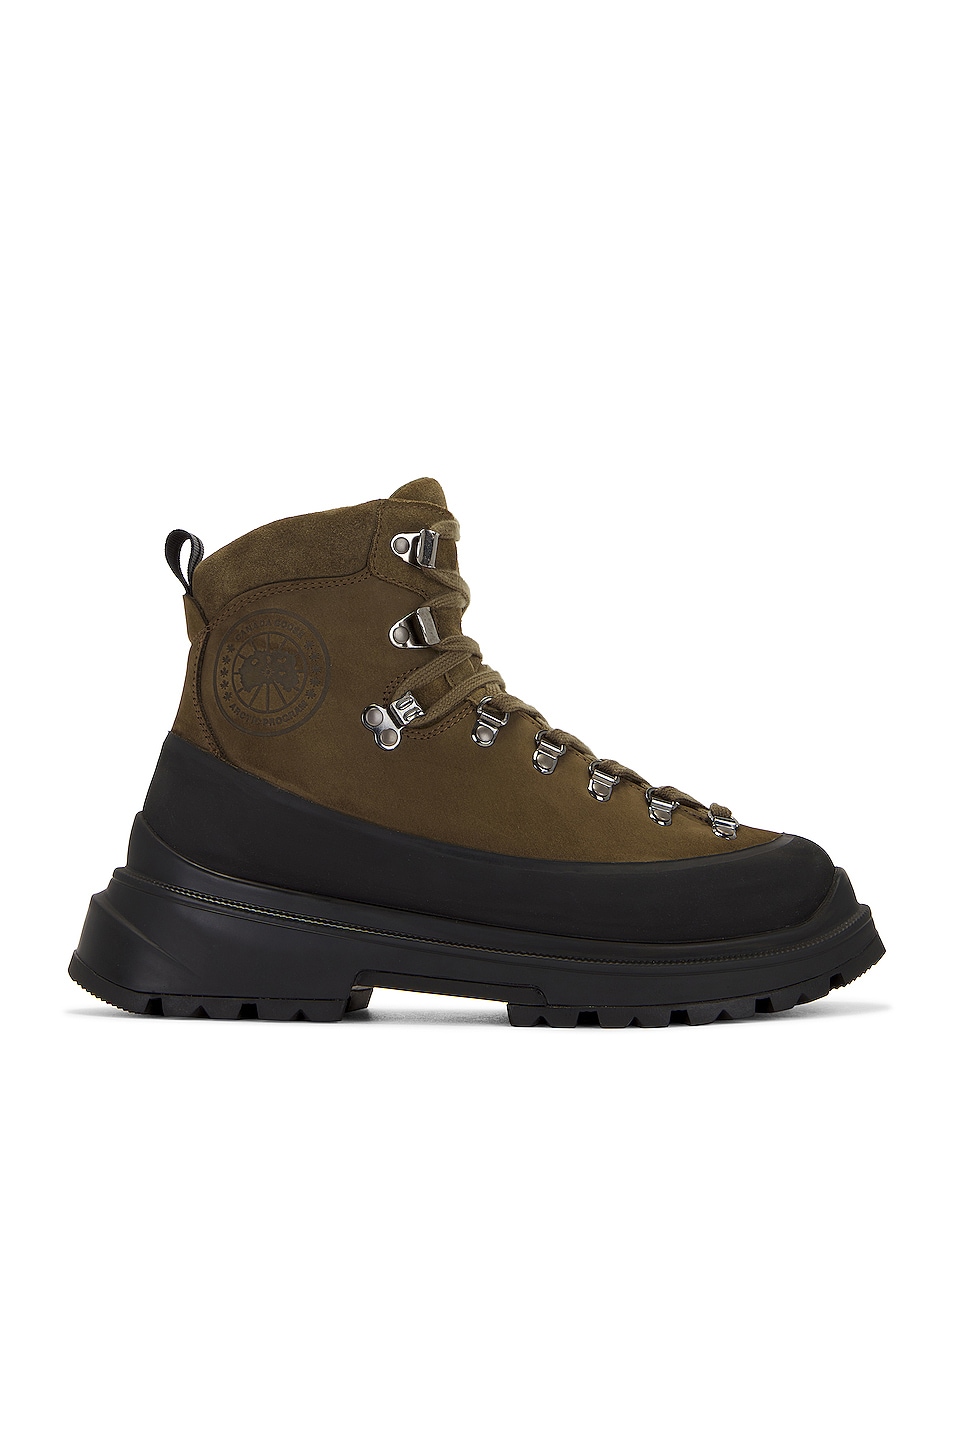 Journey Boot in Army